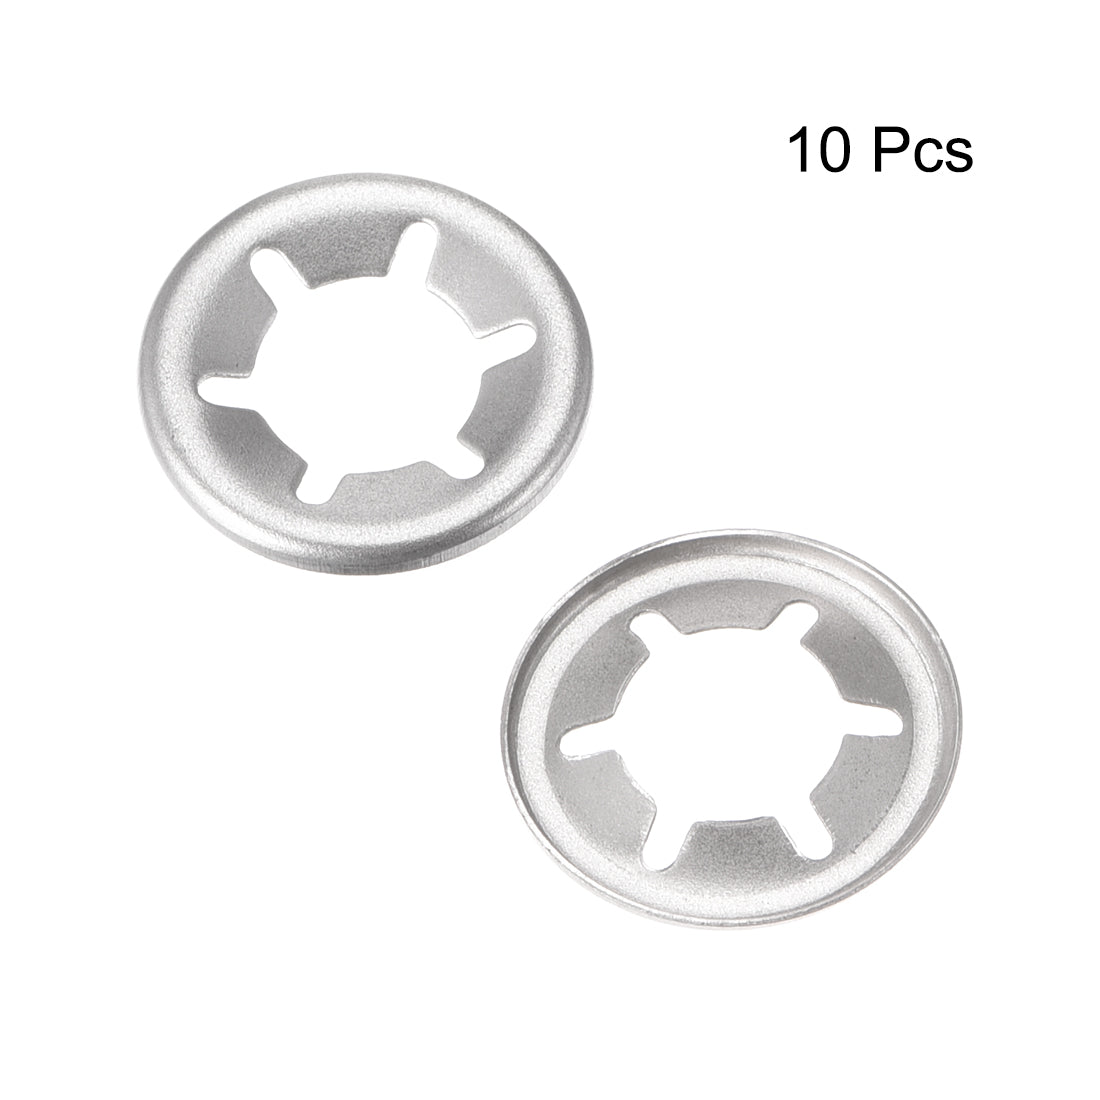 uxcell Uxcell Internal Tooth Star Washers Stainless Steel Push On Lock Washer Locking Clips Fastener